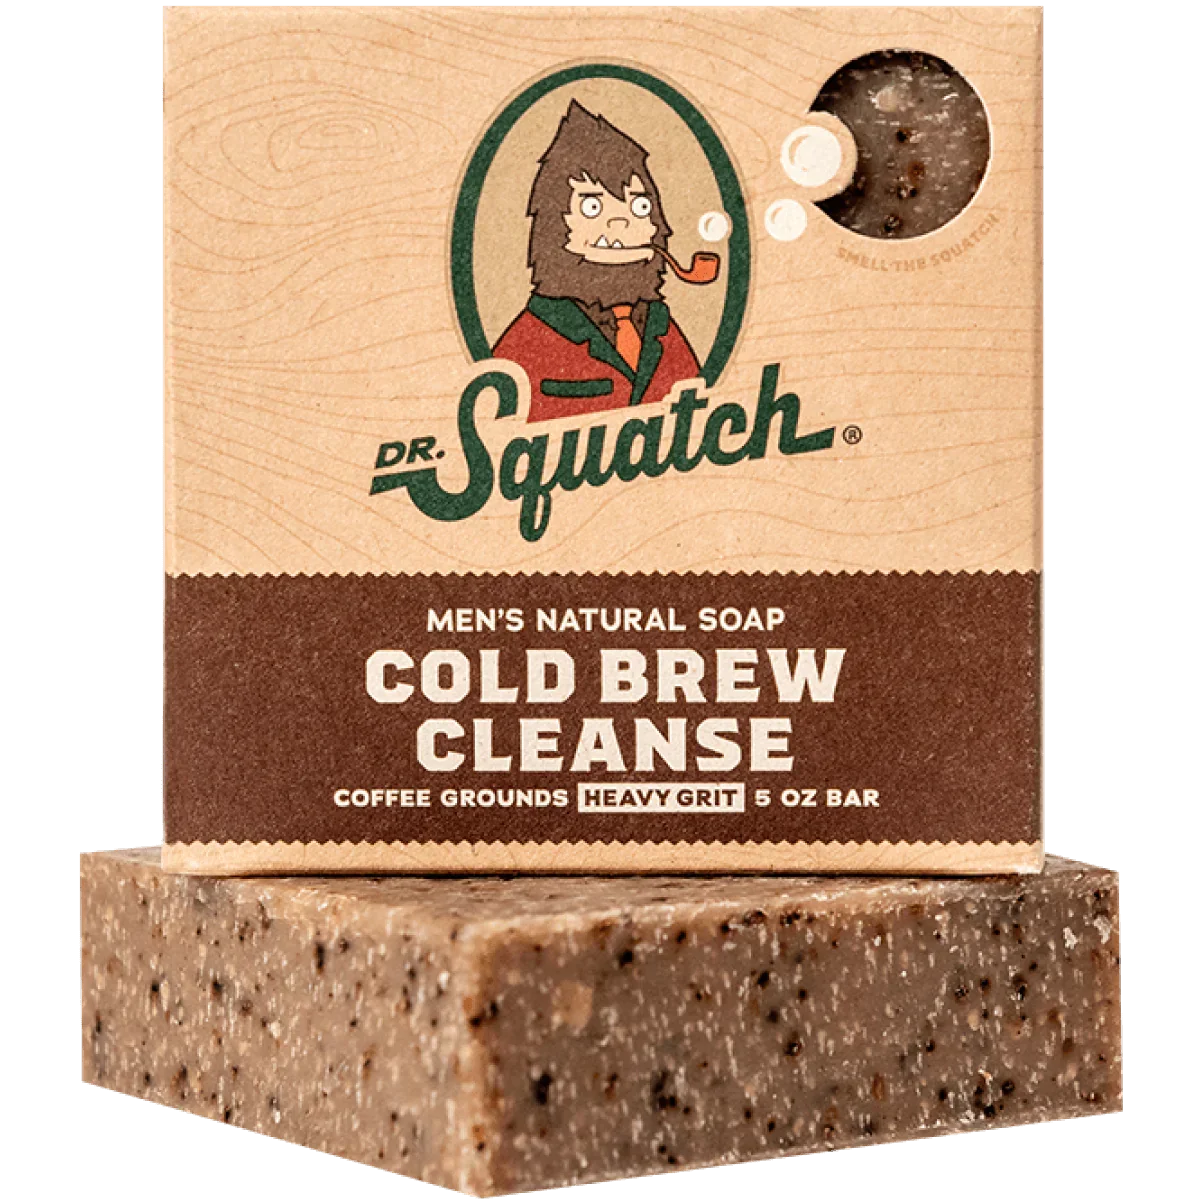 Cold Brew Cleanse┃soap┃dr.squatch - Bar Soap - Body